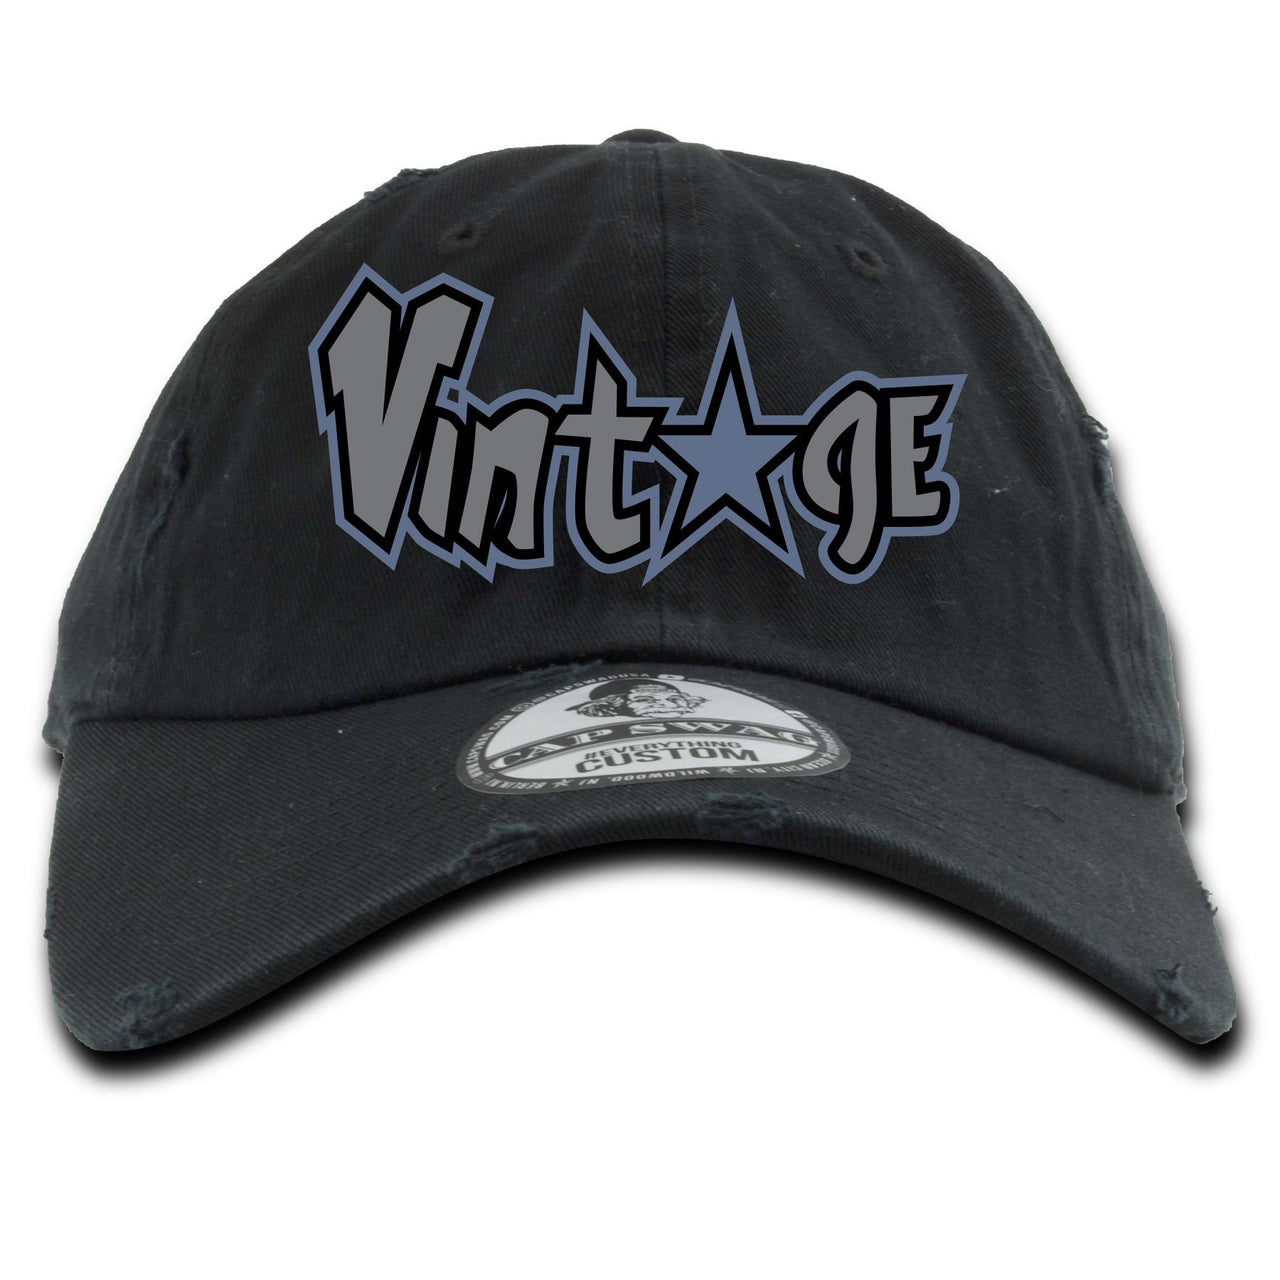 Cap and Gown 13s Distressed Dad Hat | Vintage Star Logo, Black